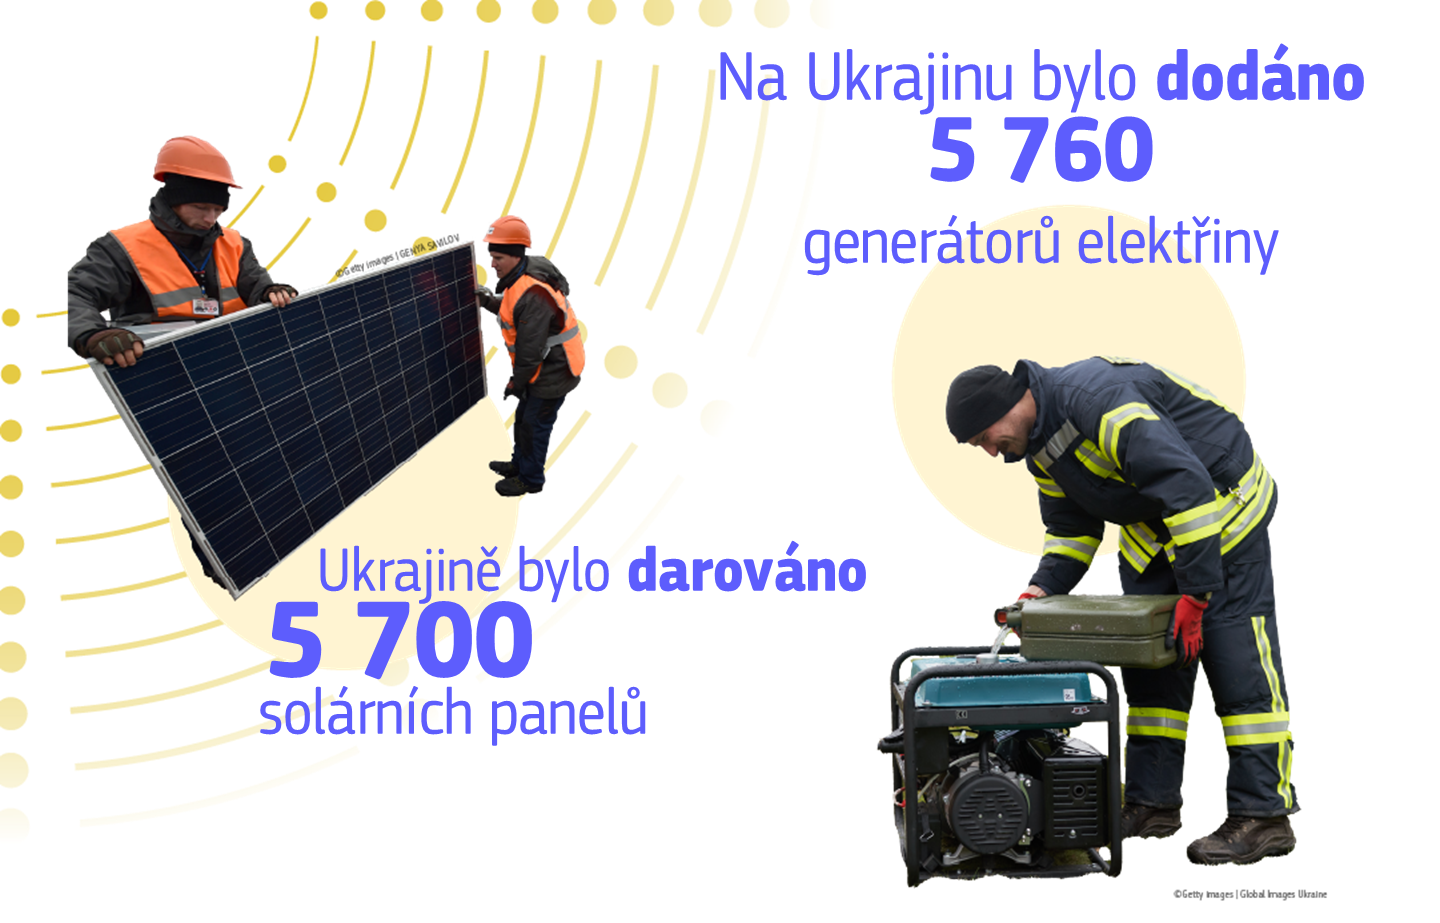 Infographic showing EU support to Ukraine's energy infrastructure